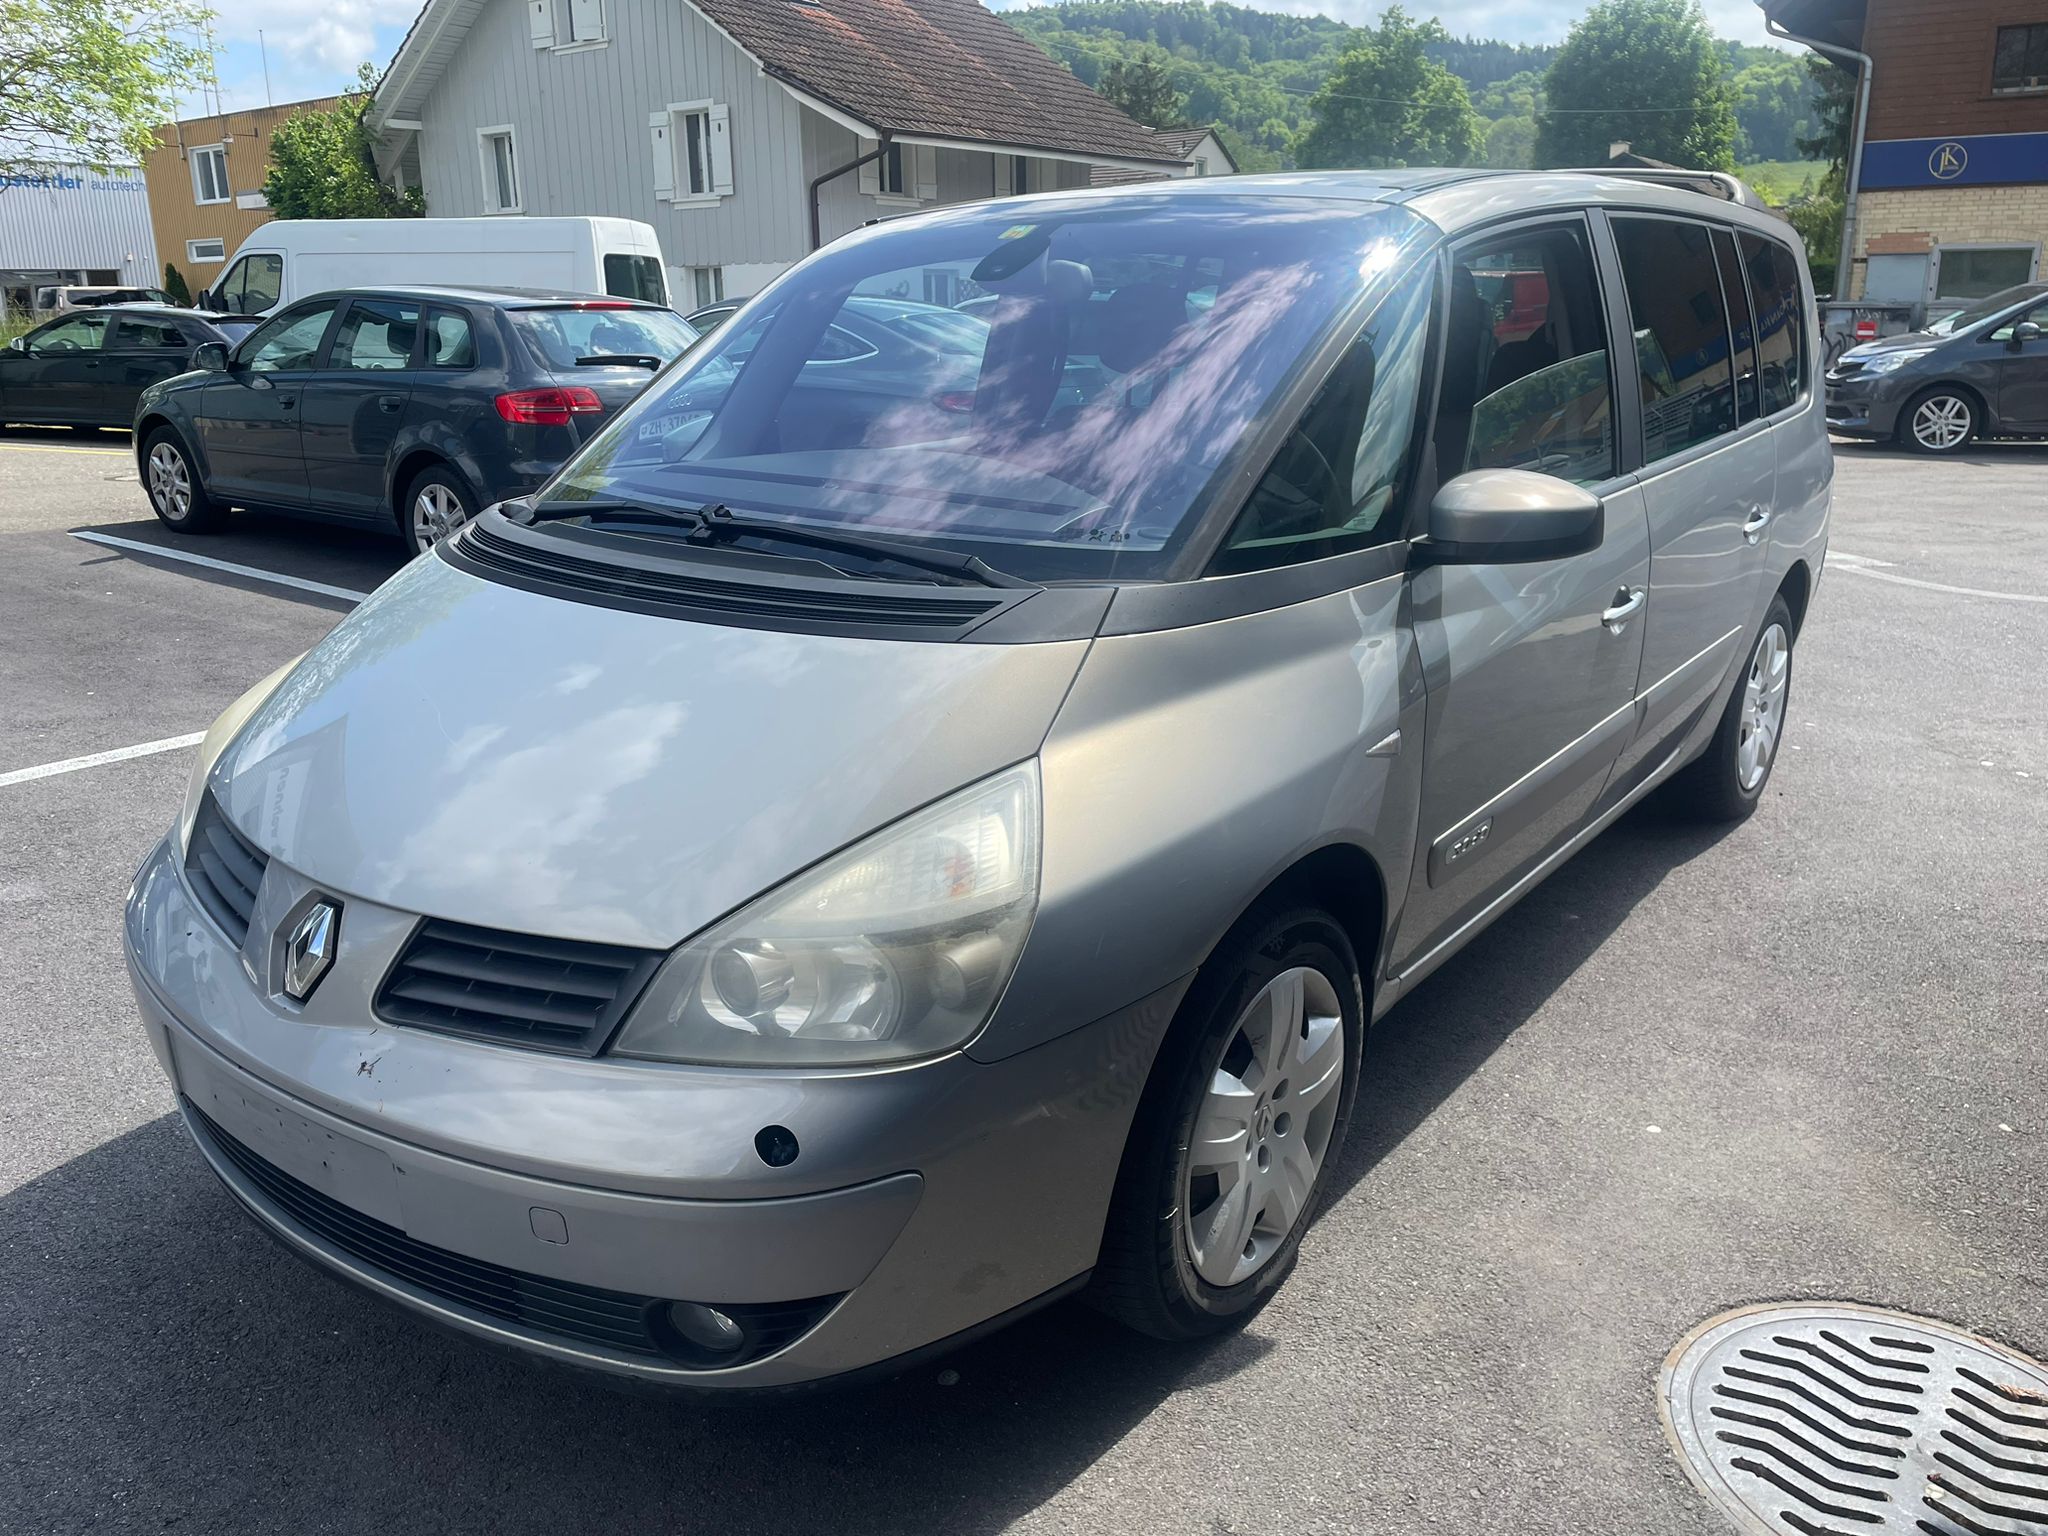 RENAULT Espace 3.0 dCi Expression Automatic